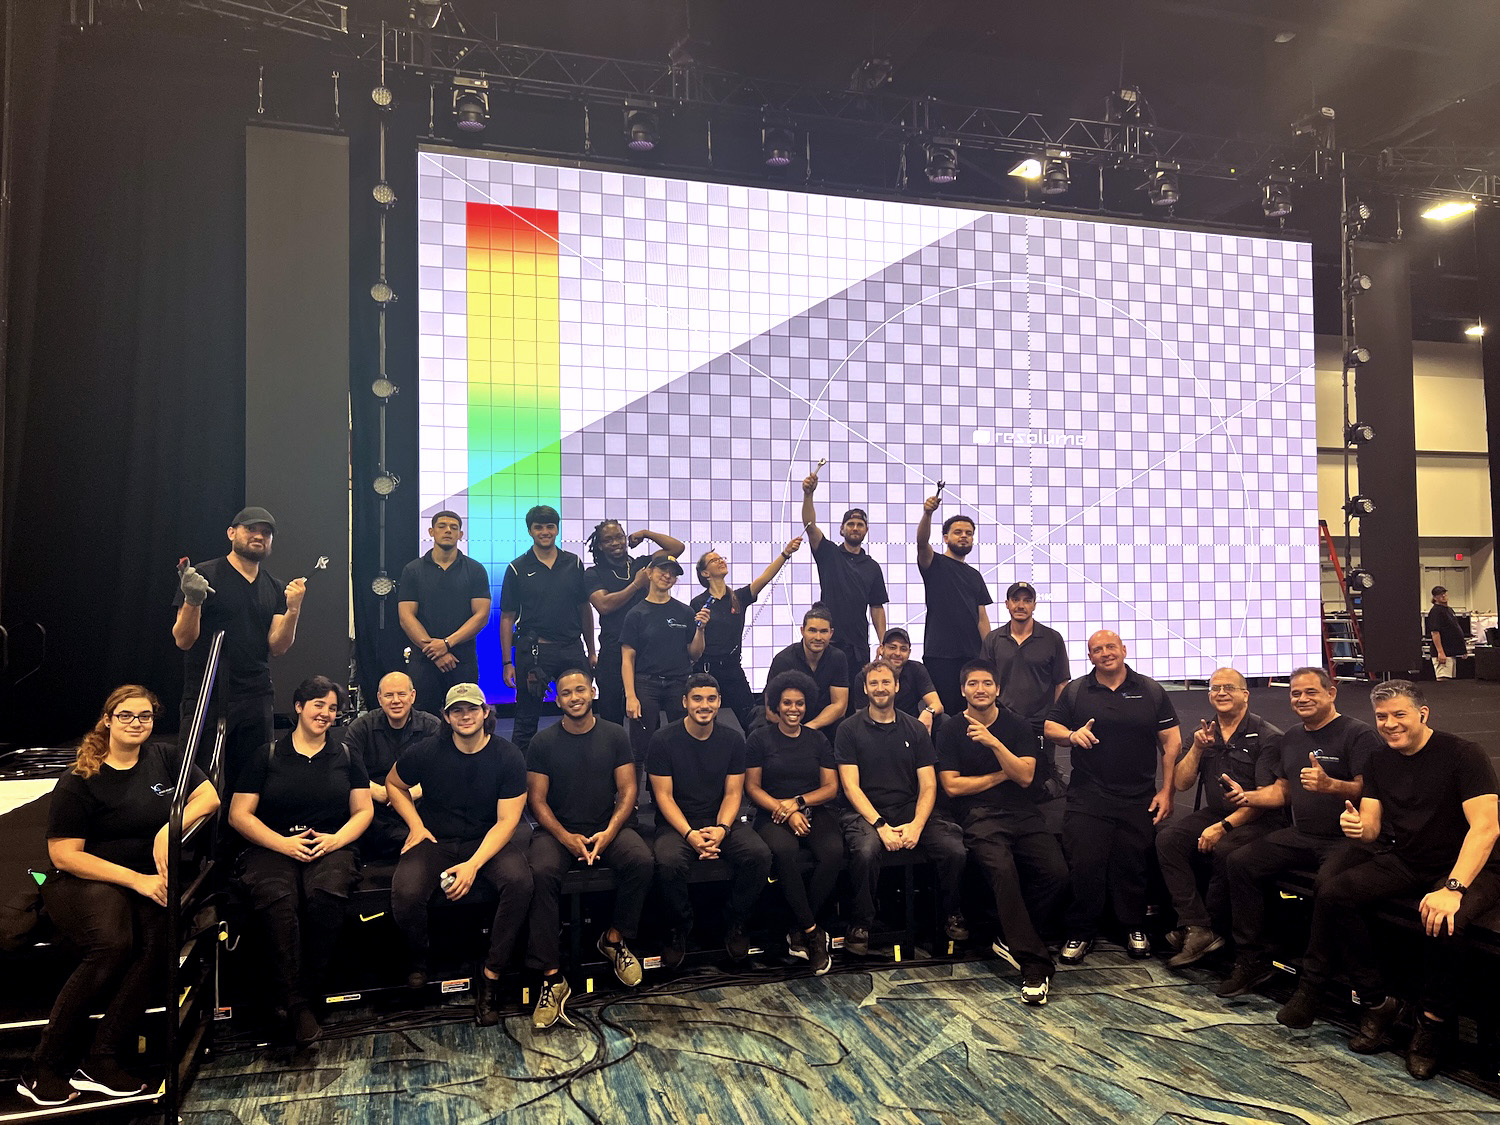 An Audio Visual Nation crew posing in front of a large projector screen at an event